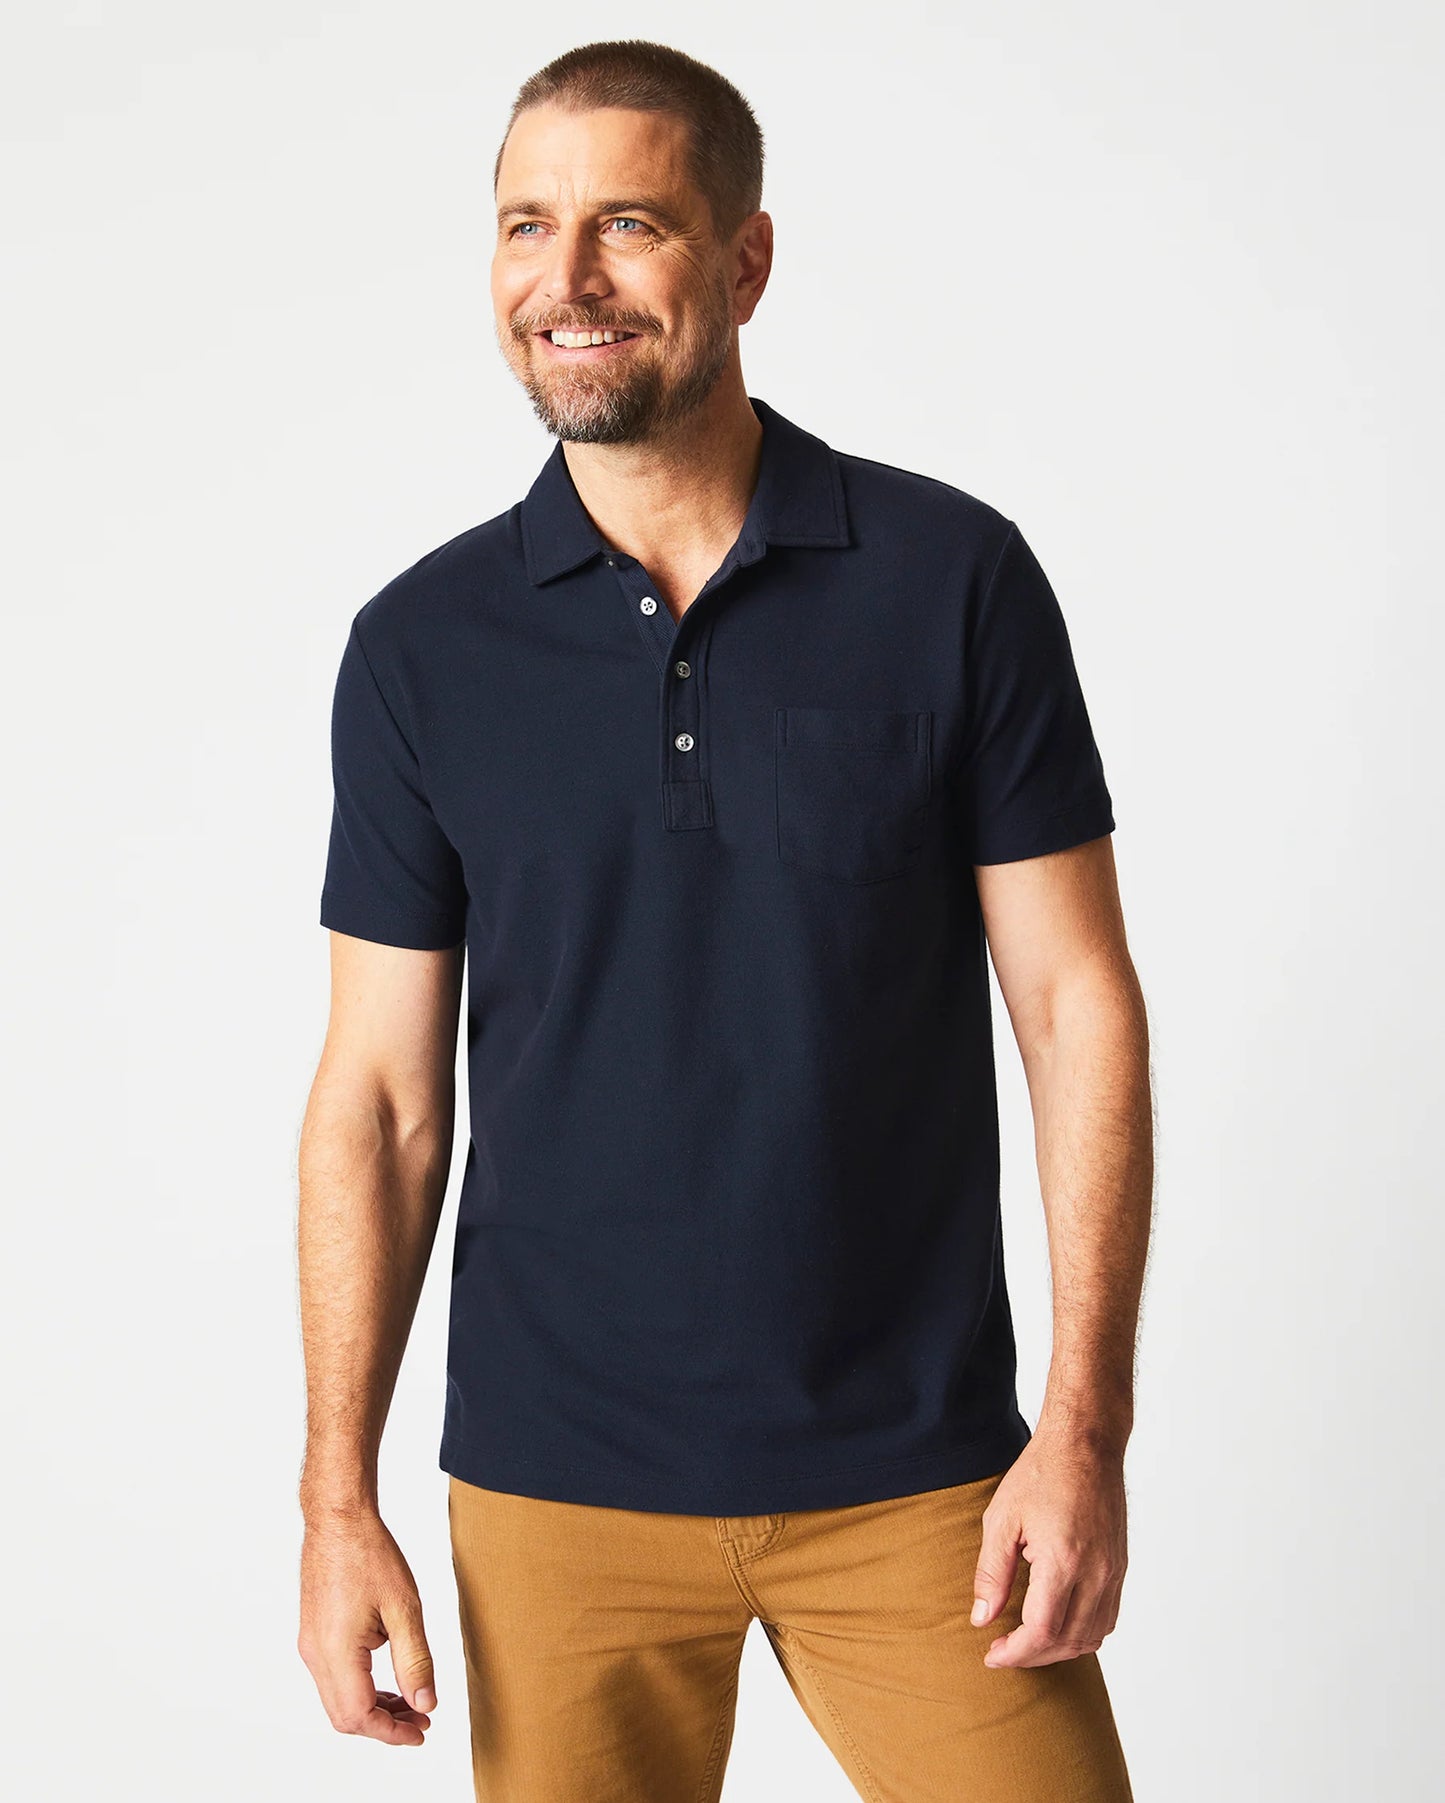 Front view of man wearing a dark blue short sleeve polo shirt by Billy Reid